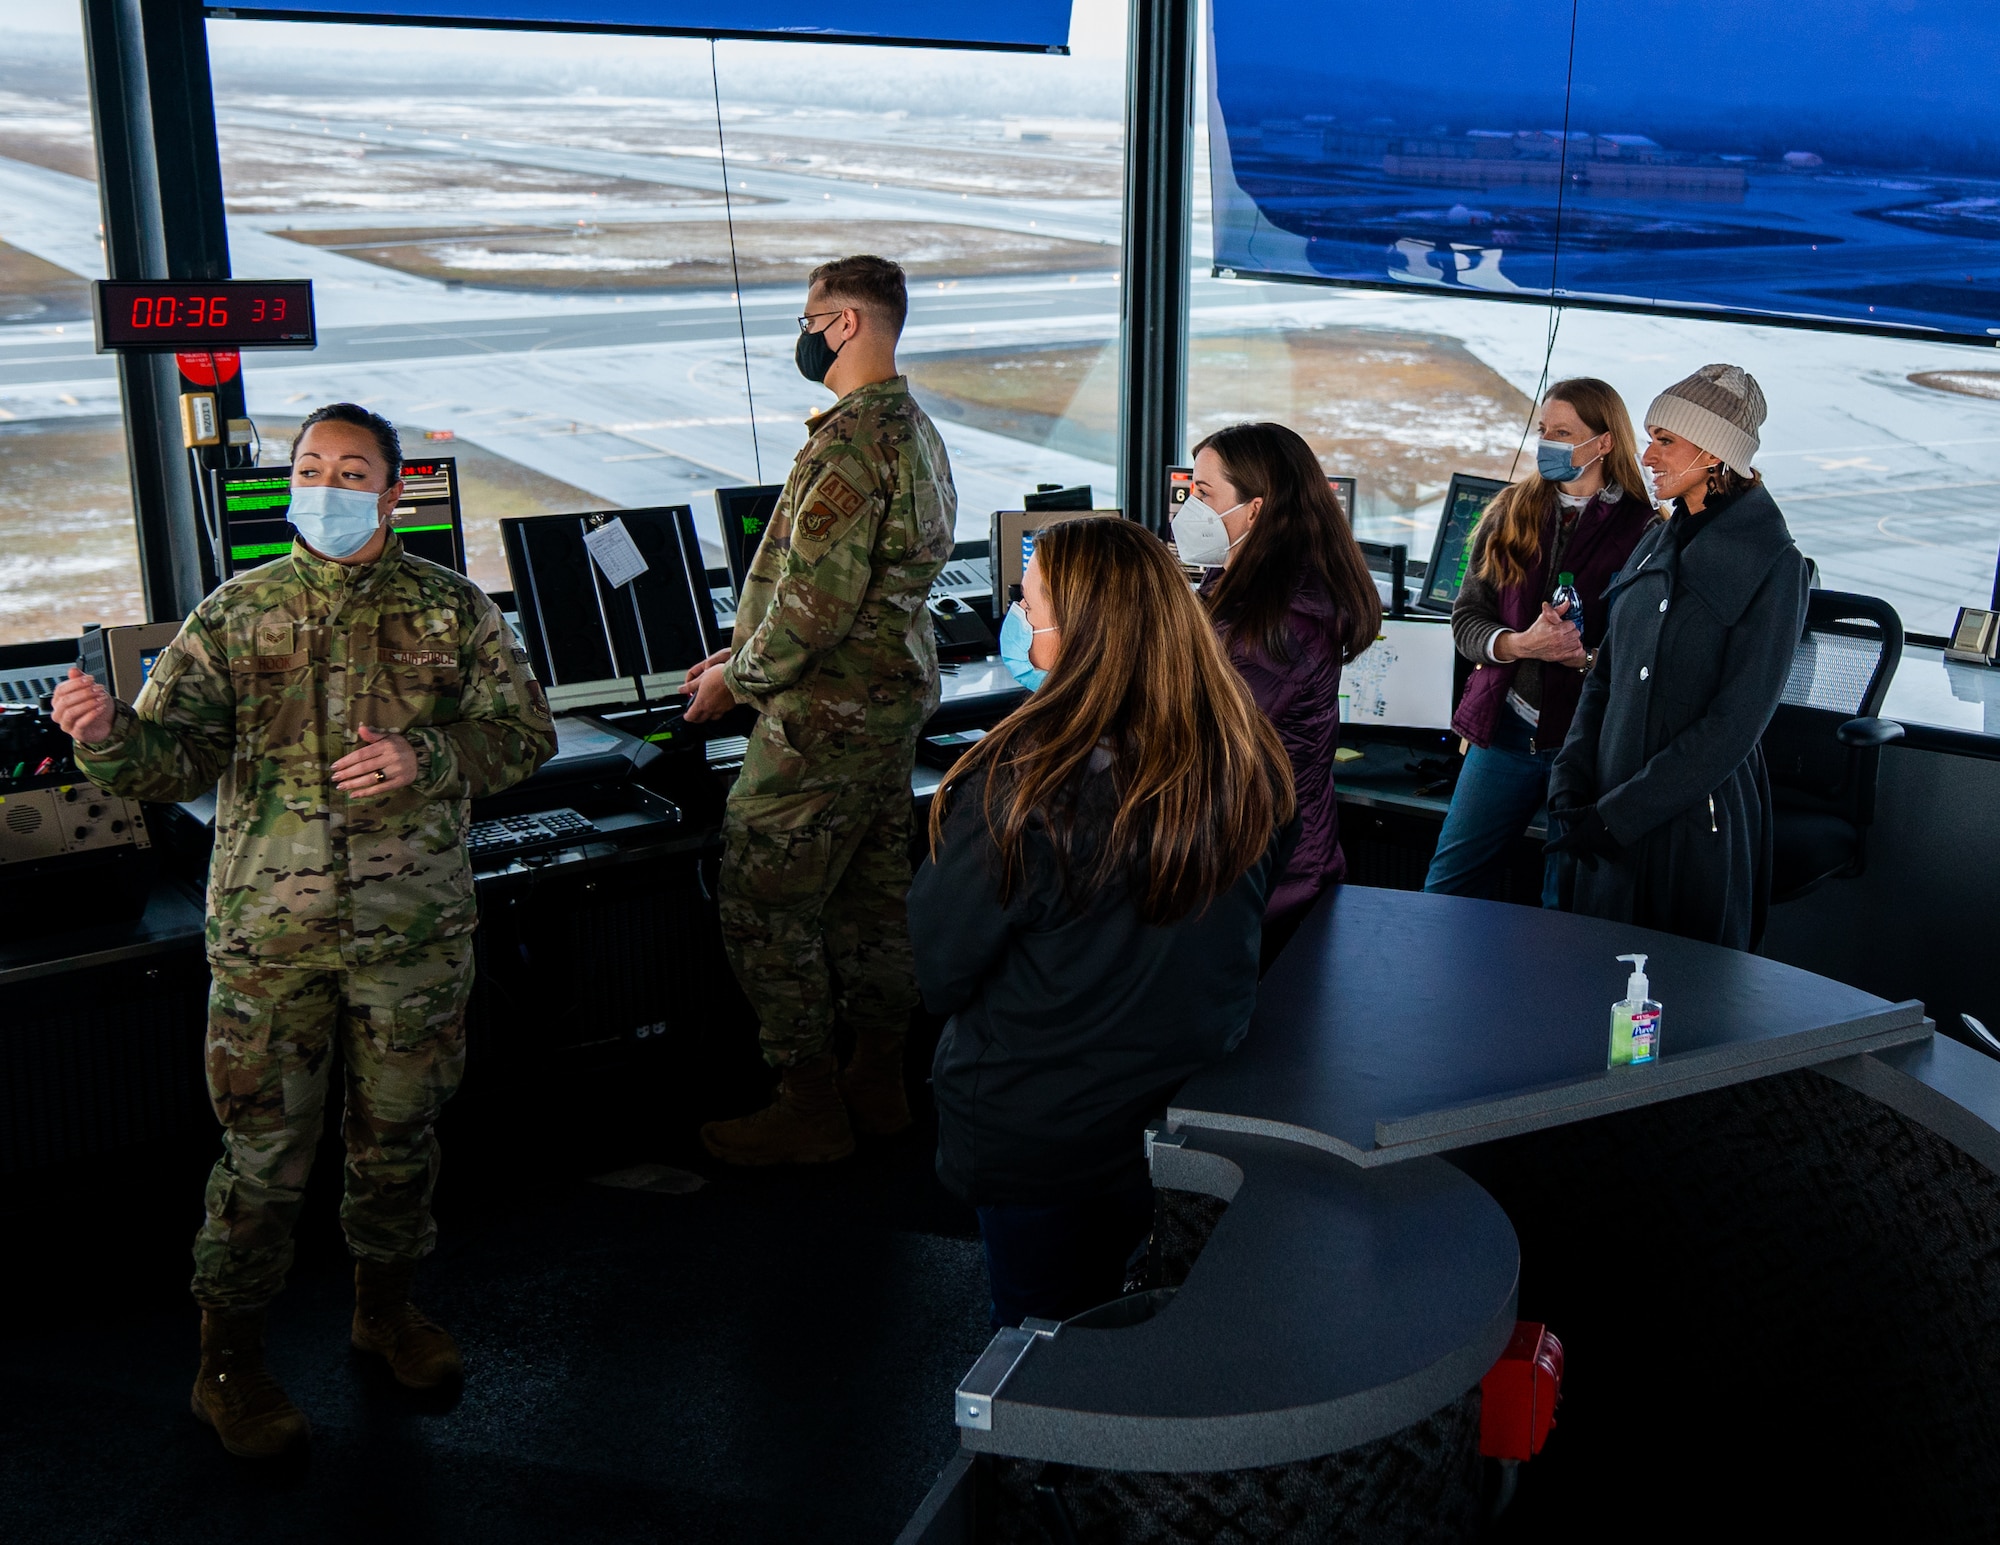 U.S. Air Force Senior Airman Fuatapu Hook, 3rd Operations Support Squadron air traffic controller, briefs 3rd Wing spouses during an immersion at Joint Base Elmendorf-Richardson, Alaska, Oct. 14, 2021. The immersion gave key spouses an opportunity to see the 3rd Wing’s operations, educating and recognizing them as key components of the wing’s mission.  (U.S. Air Force photo by Senior Airman Justin Wynn)